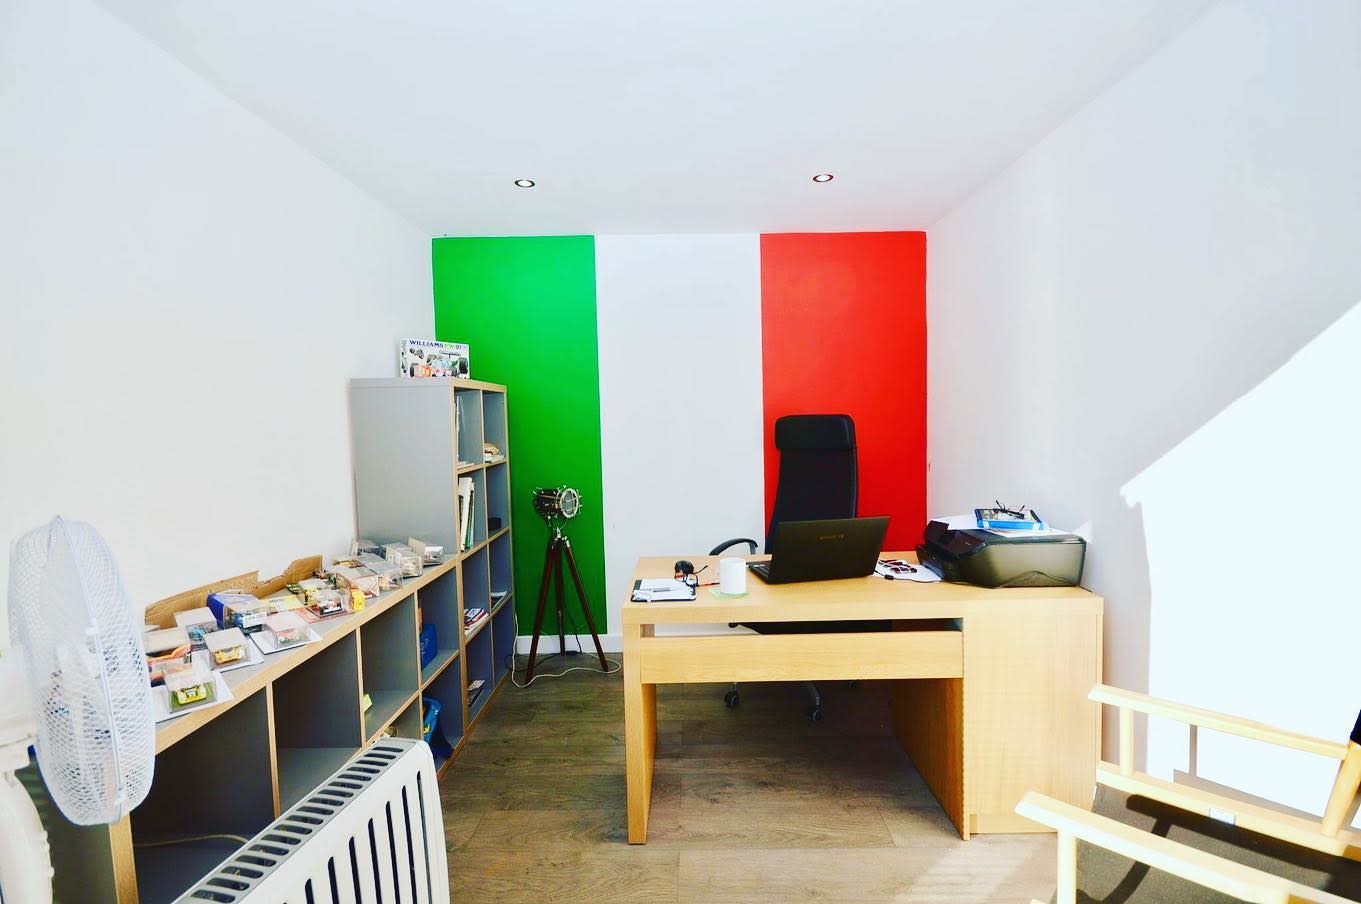 Garage office wooden desk with Italian flag on the wall 